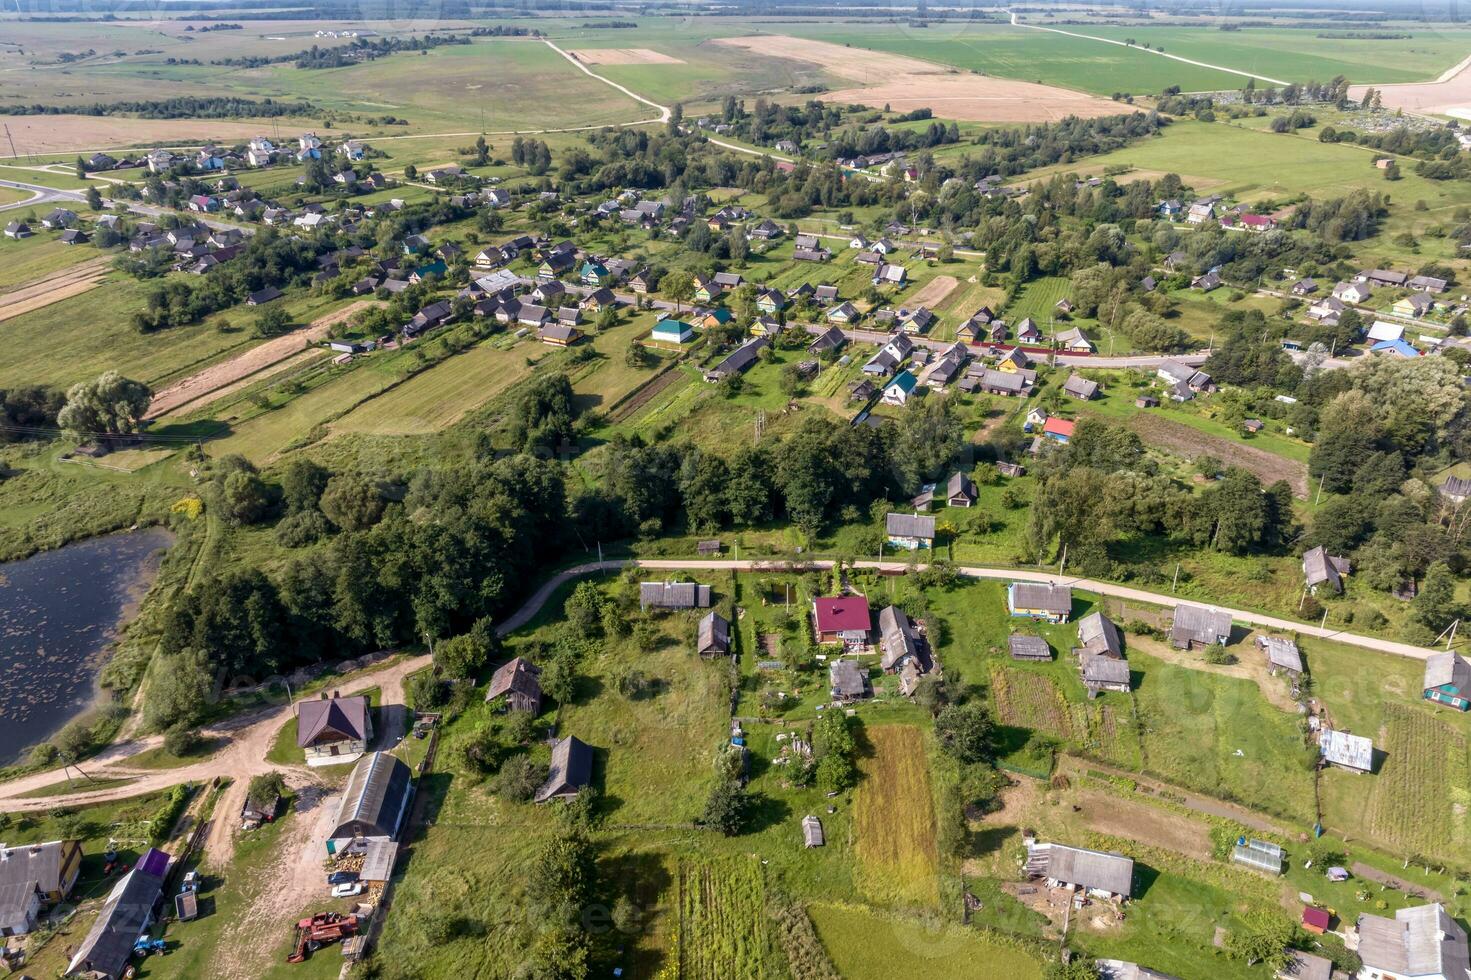 panoramic aerial view of eco village with wooden houses, gravel road, gardens and orchards photo